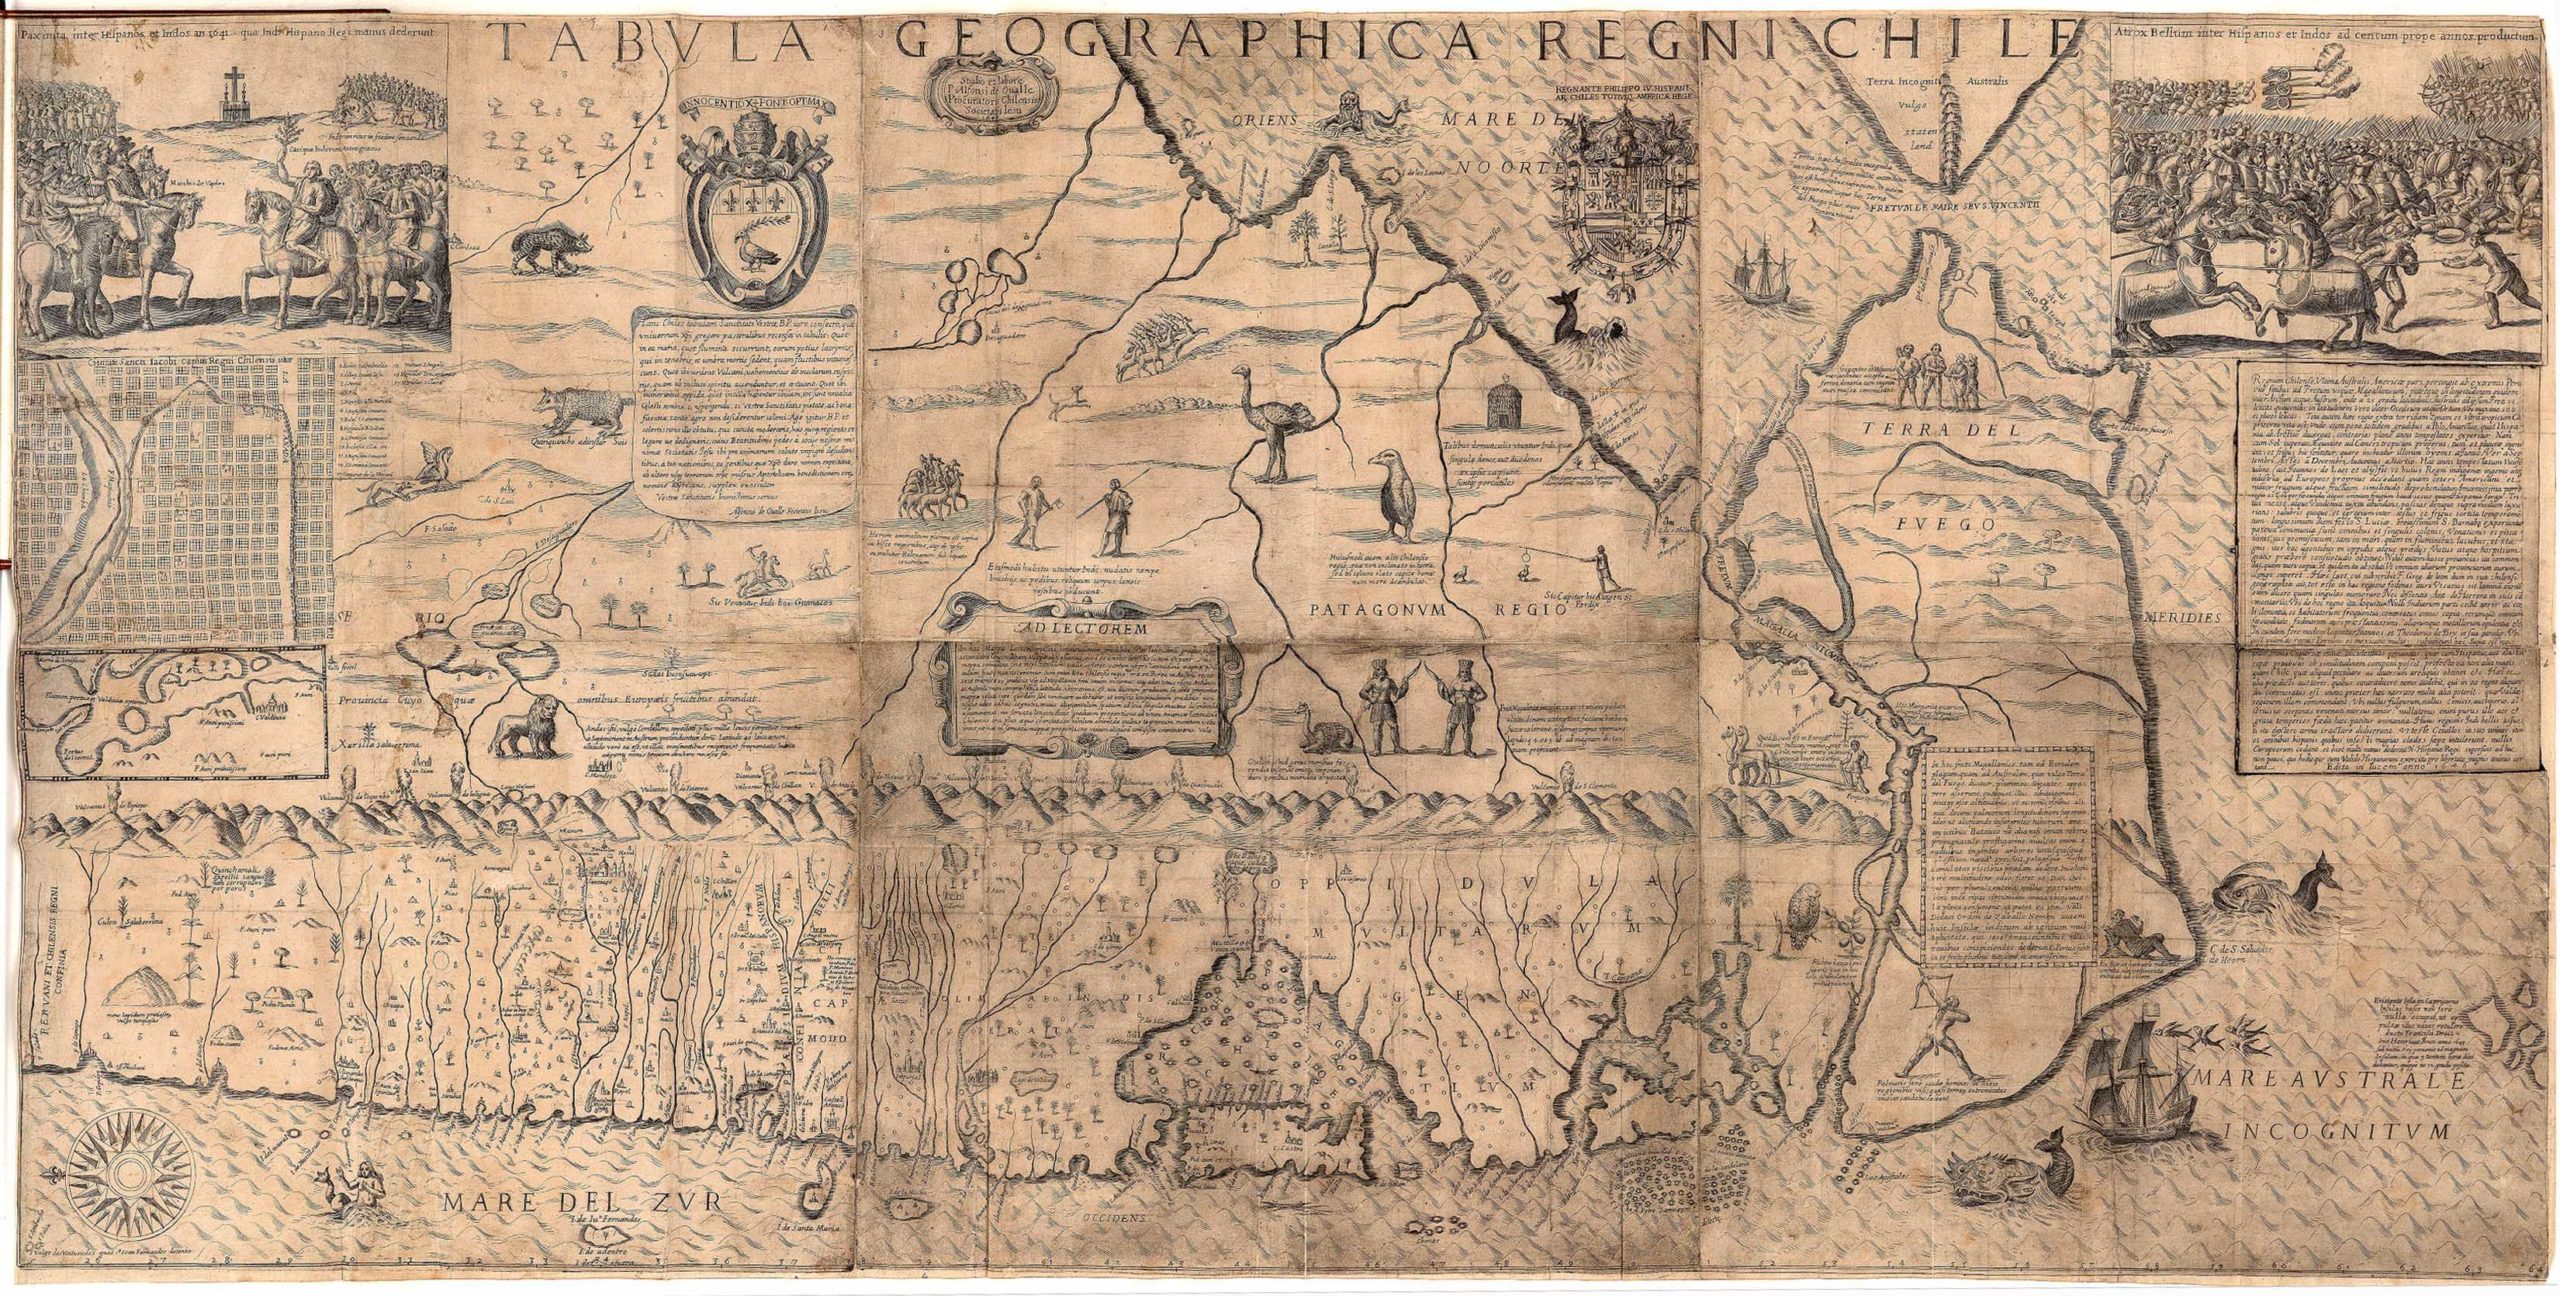 Alonso de Ovalle, Tabula geographica regni Chile, 1646 (John Carter Brown Library, Brown University, Providence, Rhode Island)